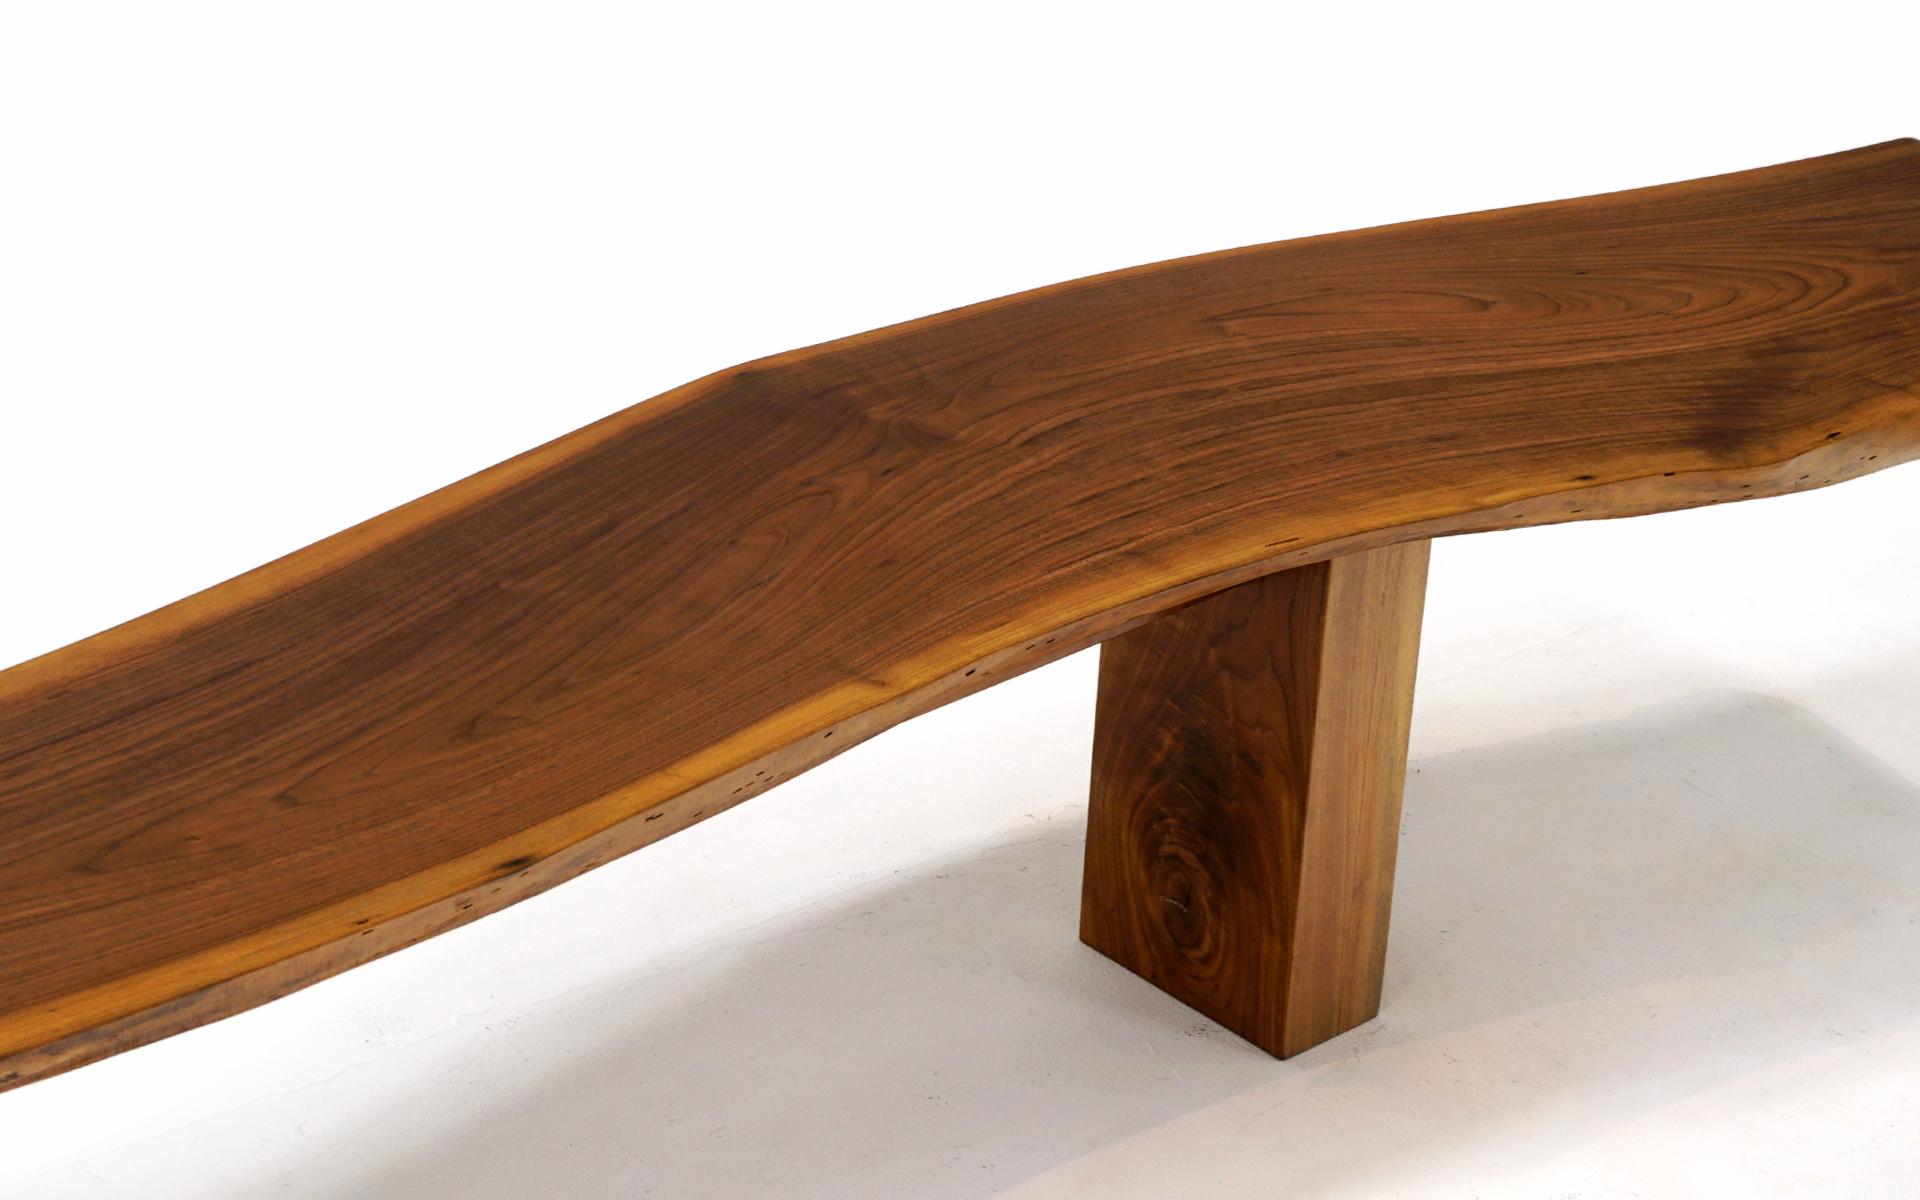 Rustic Monumental Curved Bench / Coffee Table in Solid Live Edge Walnut, One of a Kind For Sale